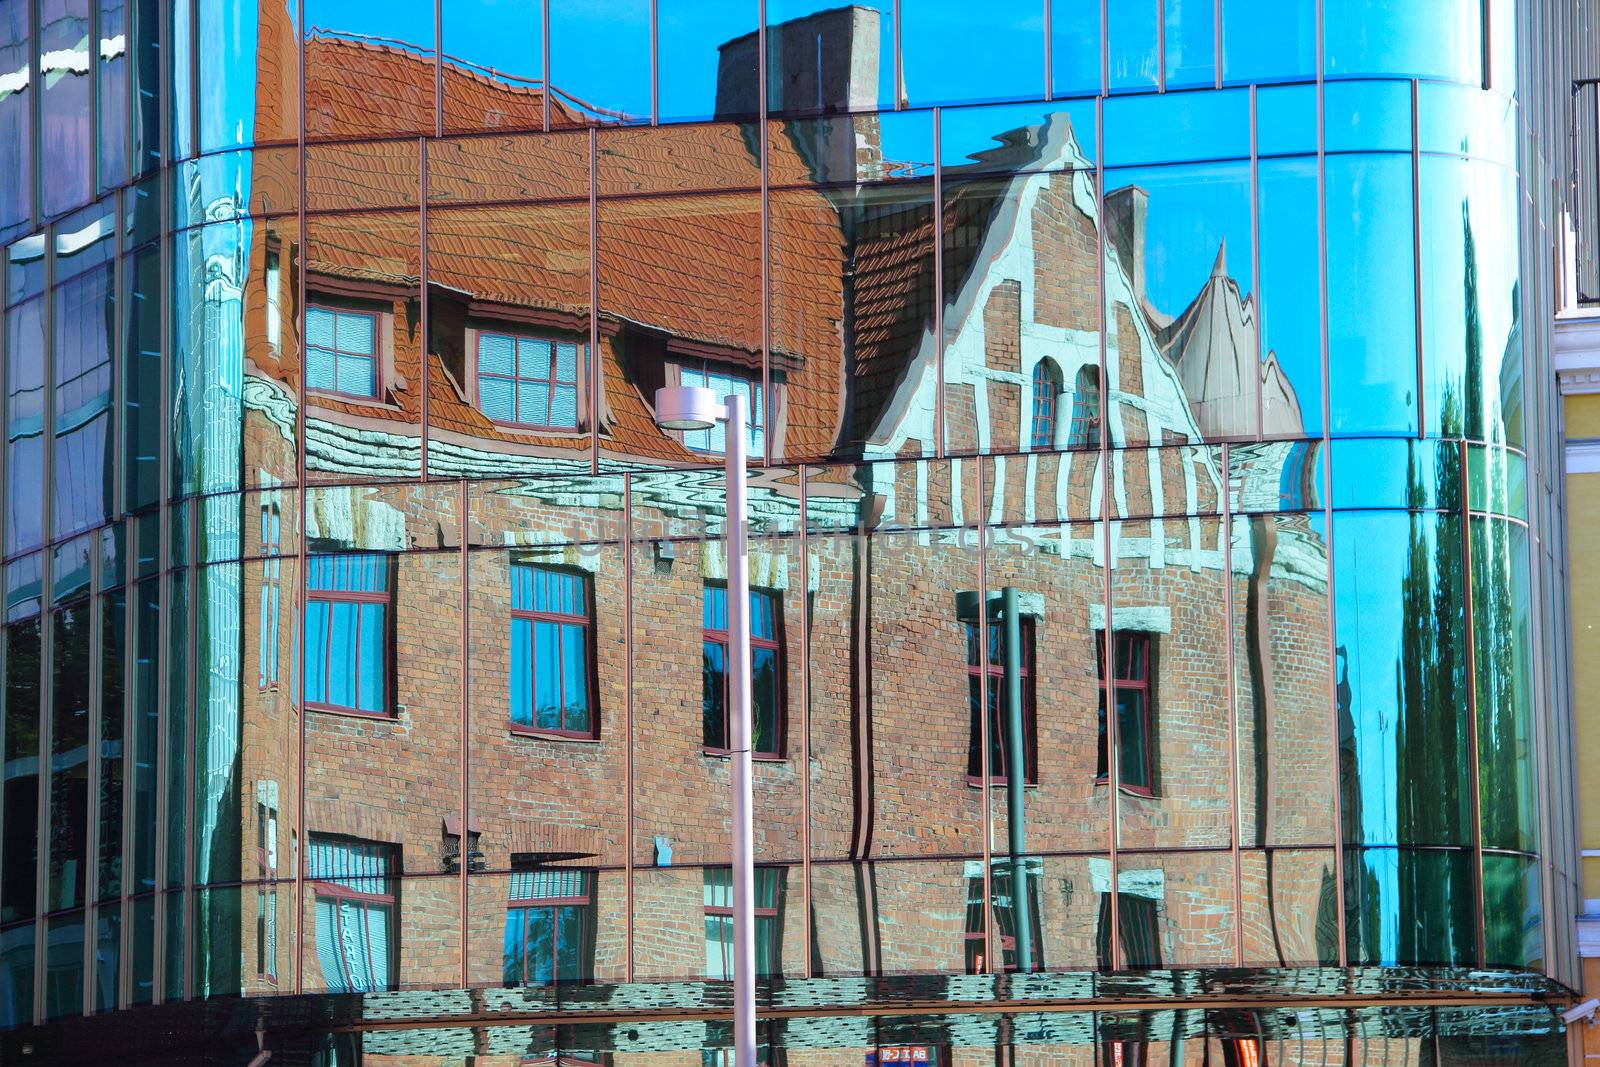 Reflection of old house in glass eindows of new moden building in Tallinn